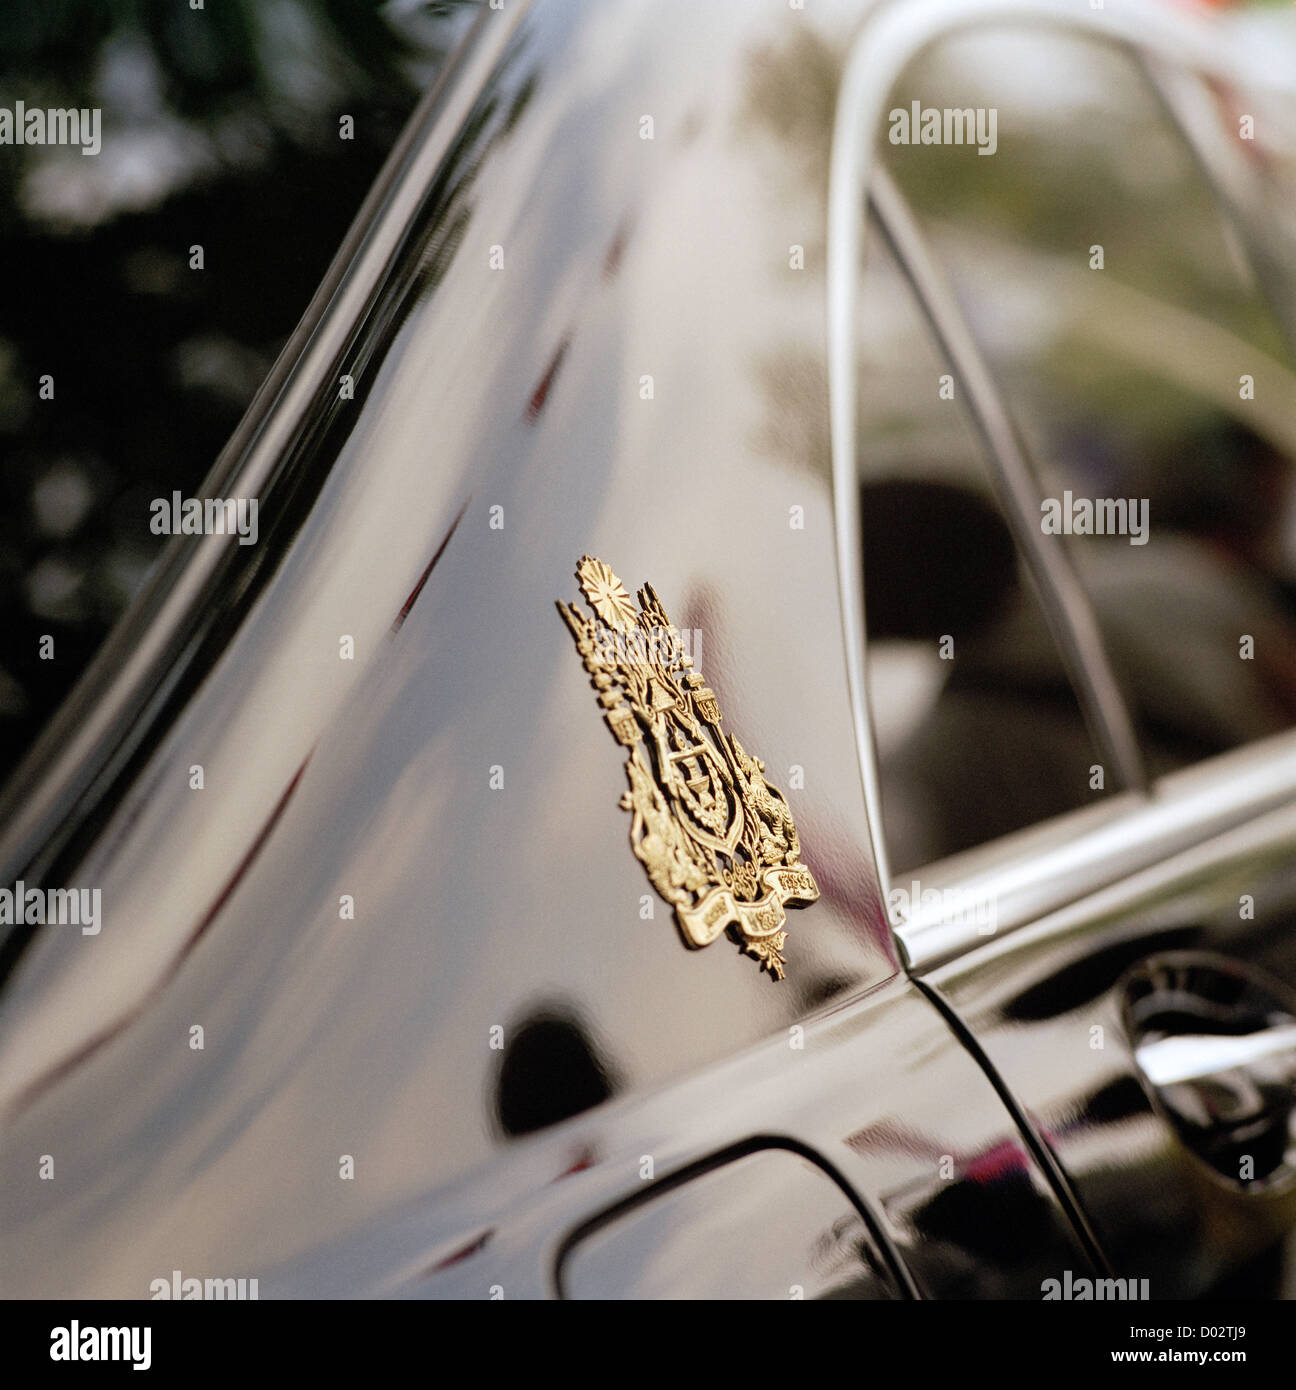 Cambodian royal crest on the car of the King in Phnom Penh Cambodia in Far East Southeast Asia. Monarch Cars Motif Logo Royalty Insignia Art Travel Stock Photo